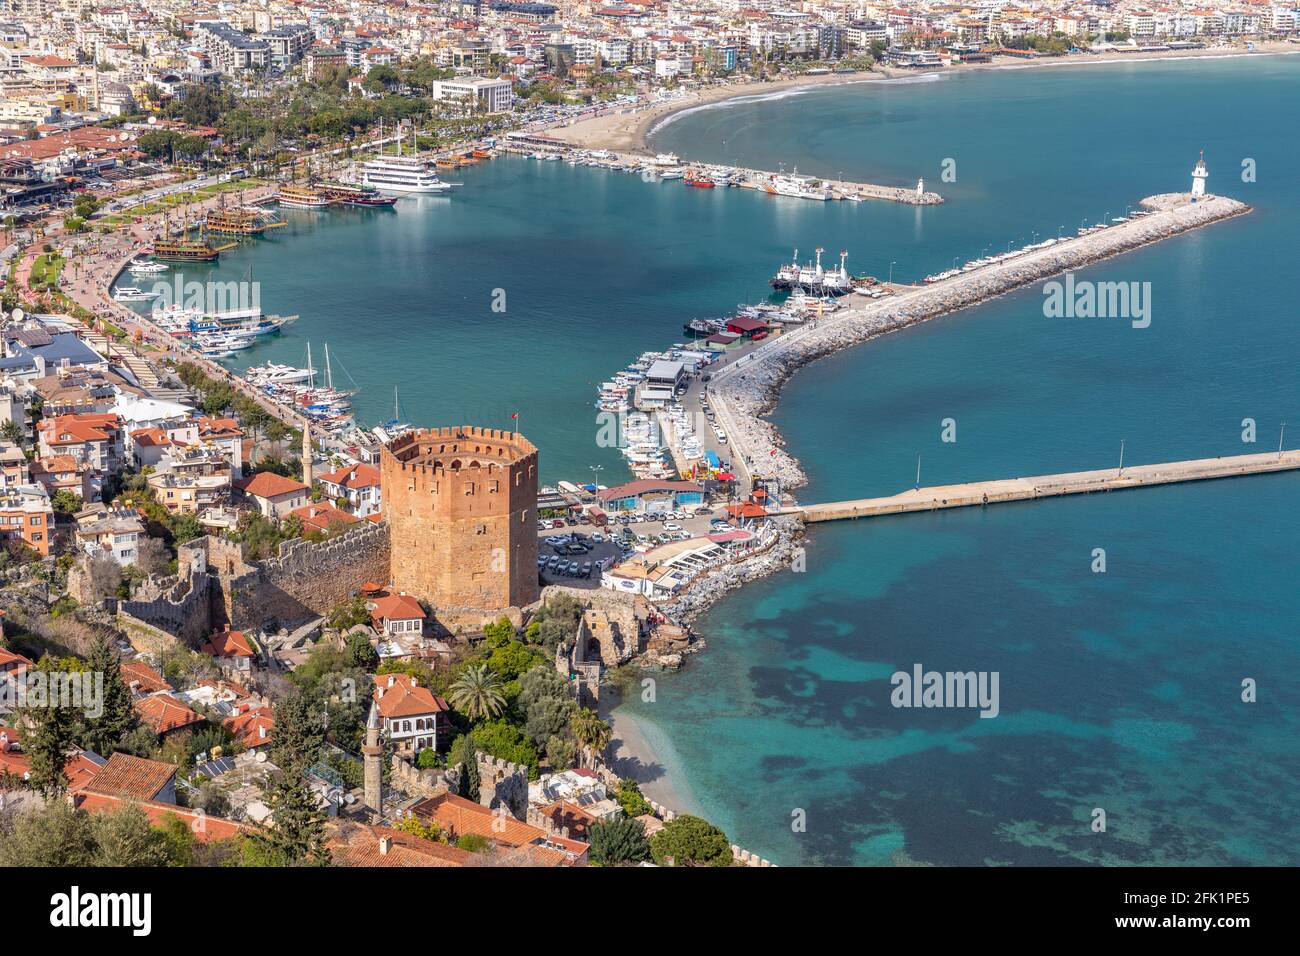 High angle view of the historical Kizil Kule, Red Tower, in Alanya Castle during the coronavirus pandemic days in Alanya, Antalya, Turkey. Stock Photo